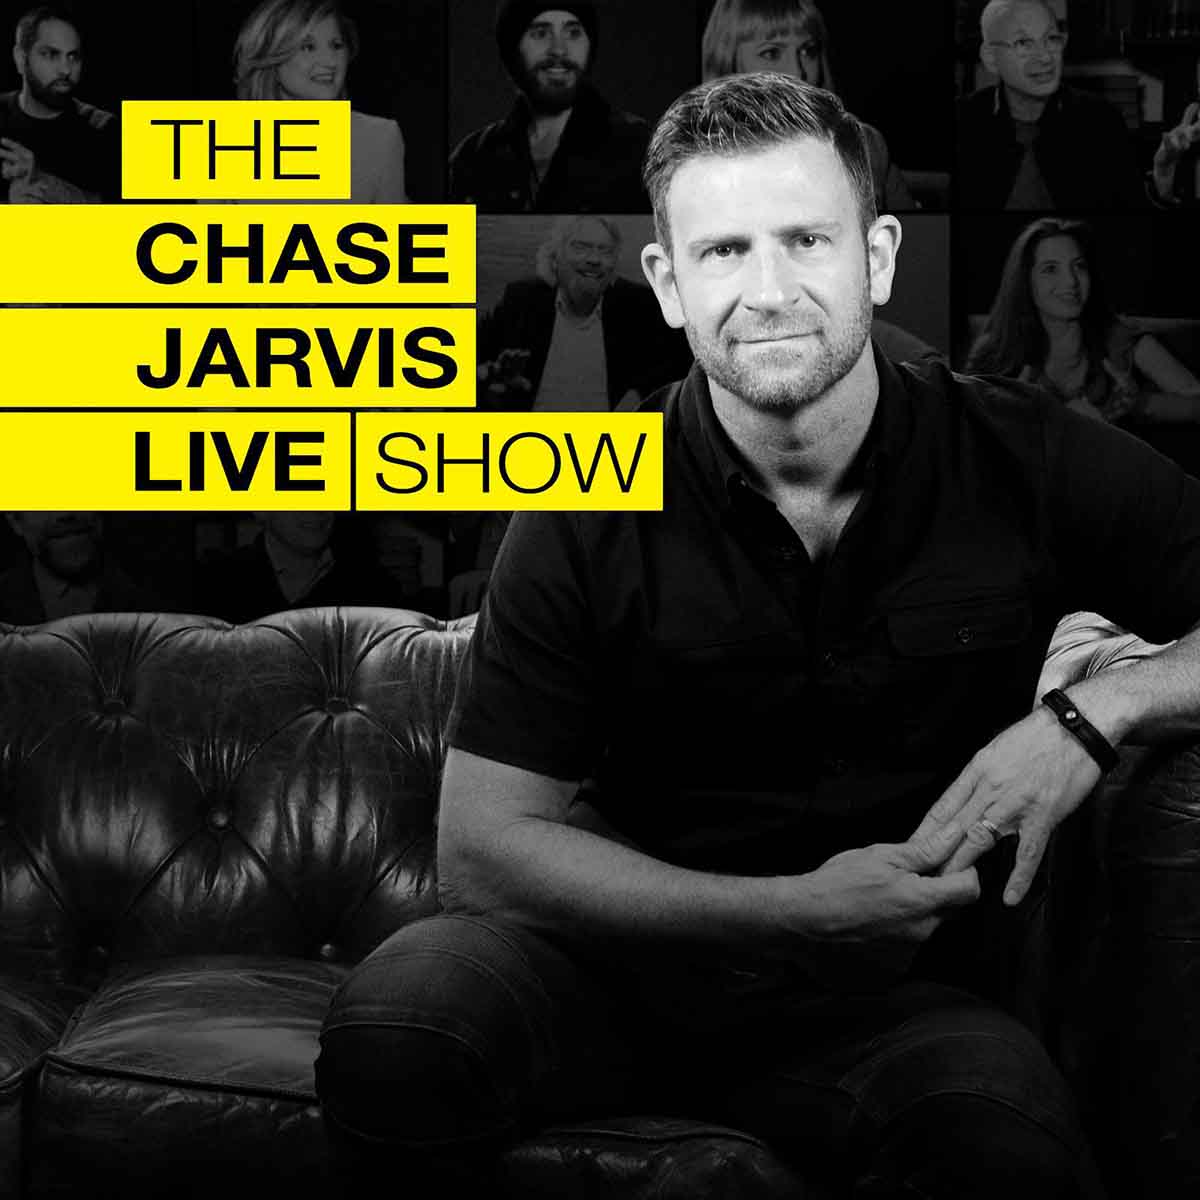 The Chase Jarvis Show